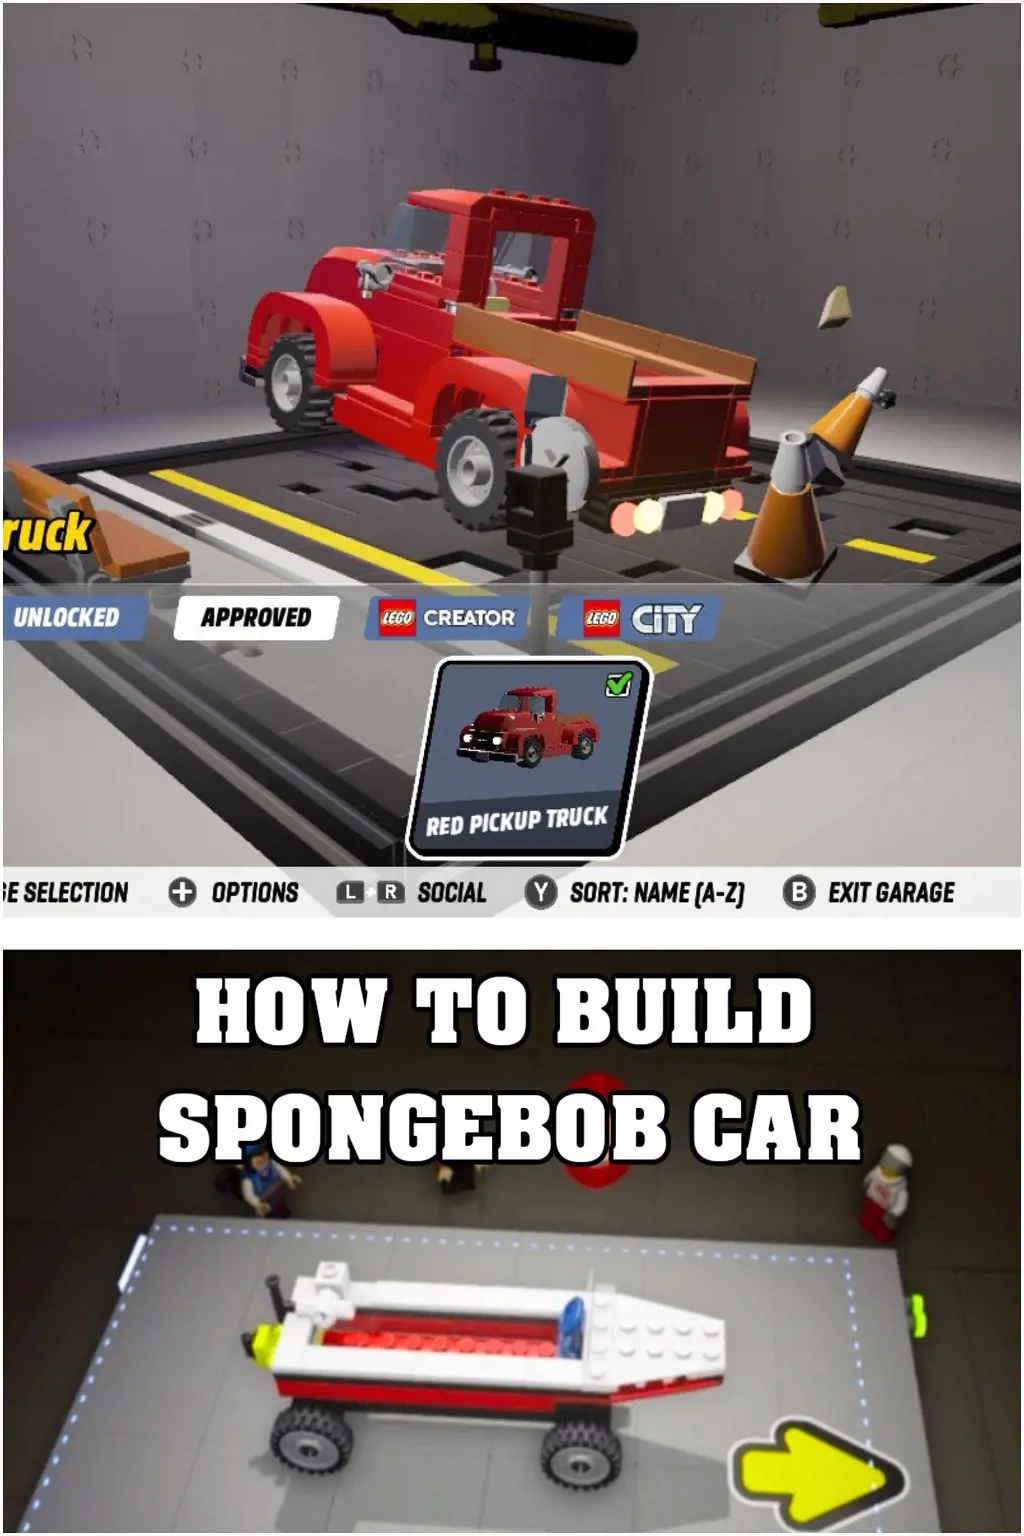 The Visual Sports developed game lets you build vehicles and explore.